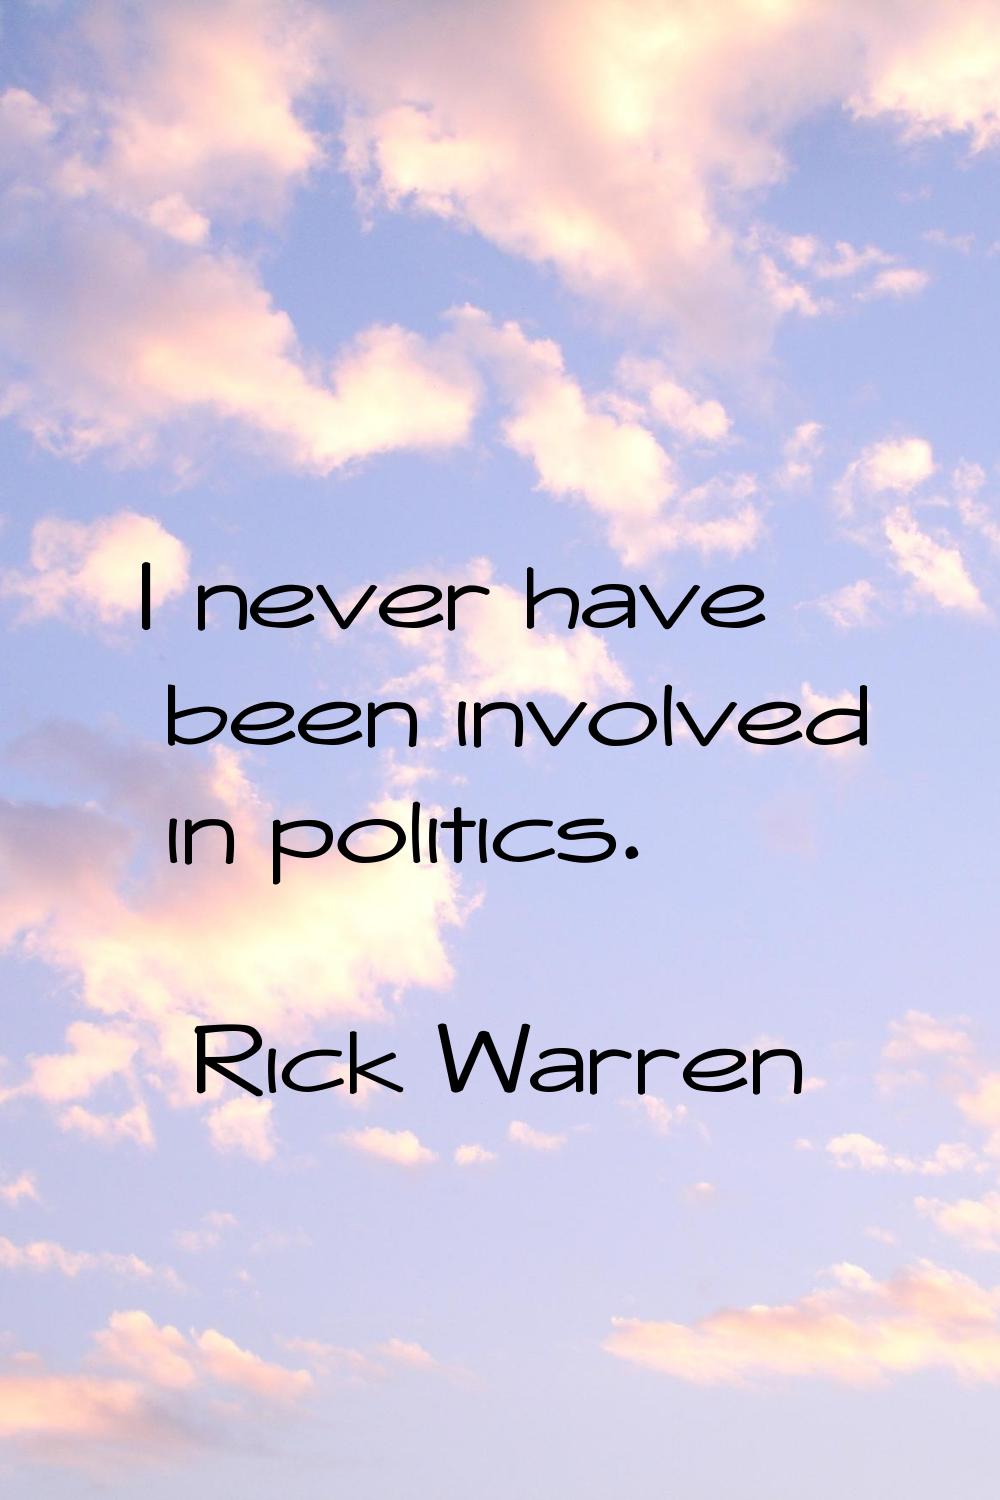 I never have been involved in politics.